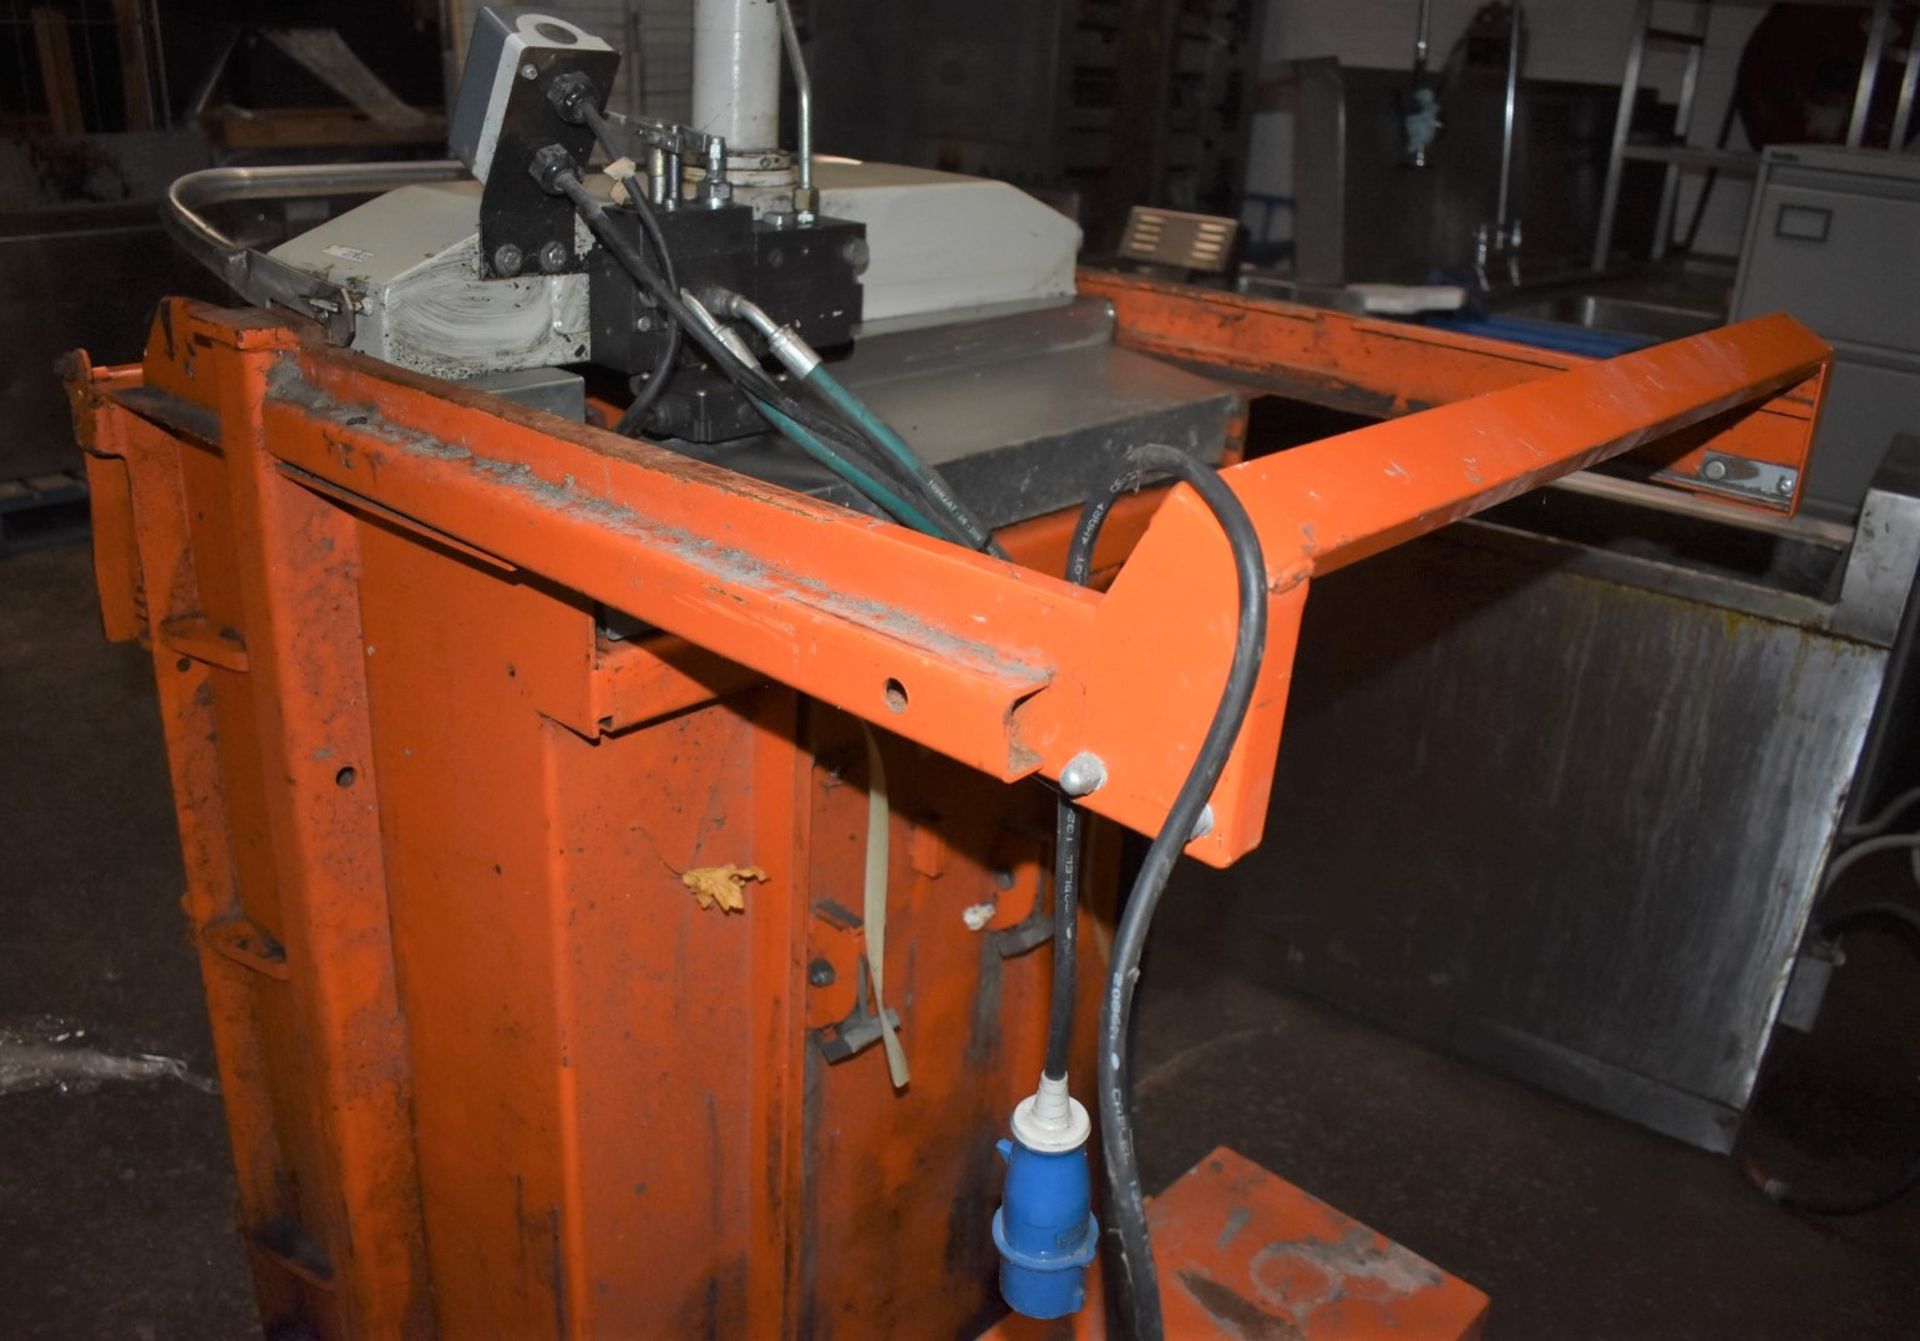 1 x Orwak 5010 Hydraulic Press Compact Cardboard Baler - Used For Compacting Recyclable or Non- - Image 14 of 15